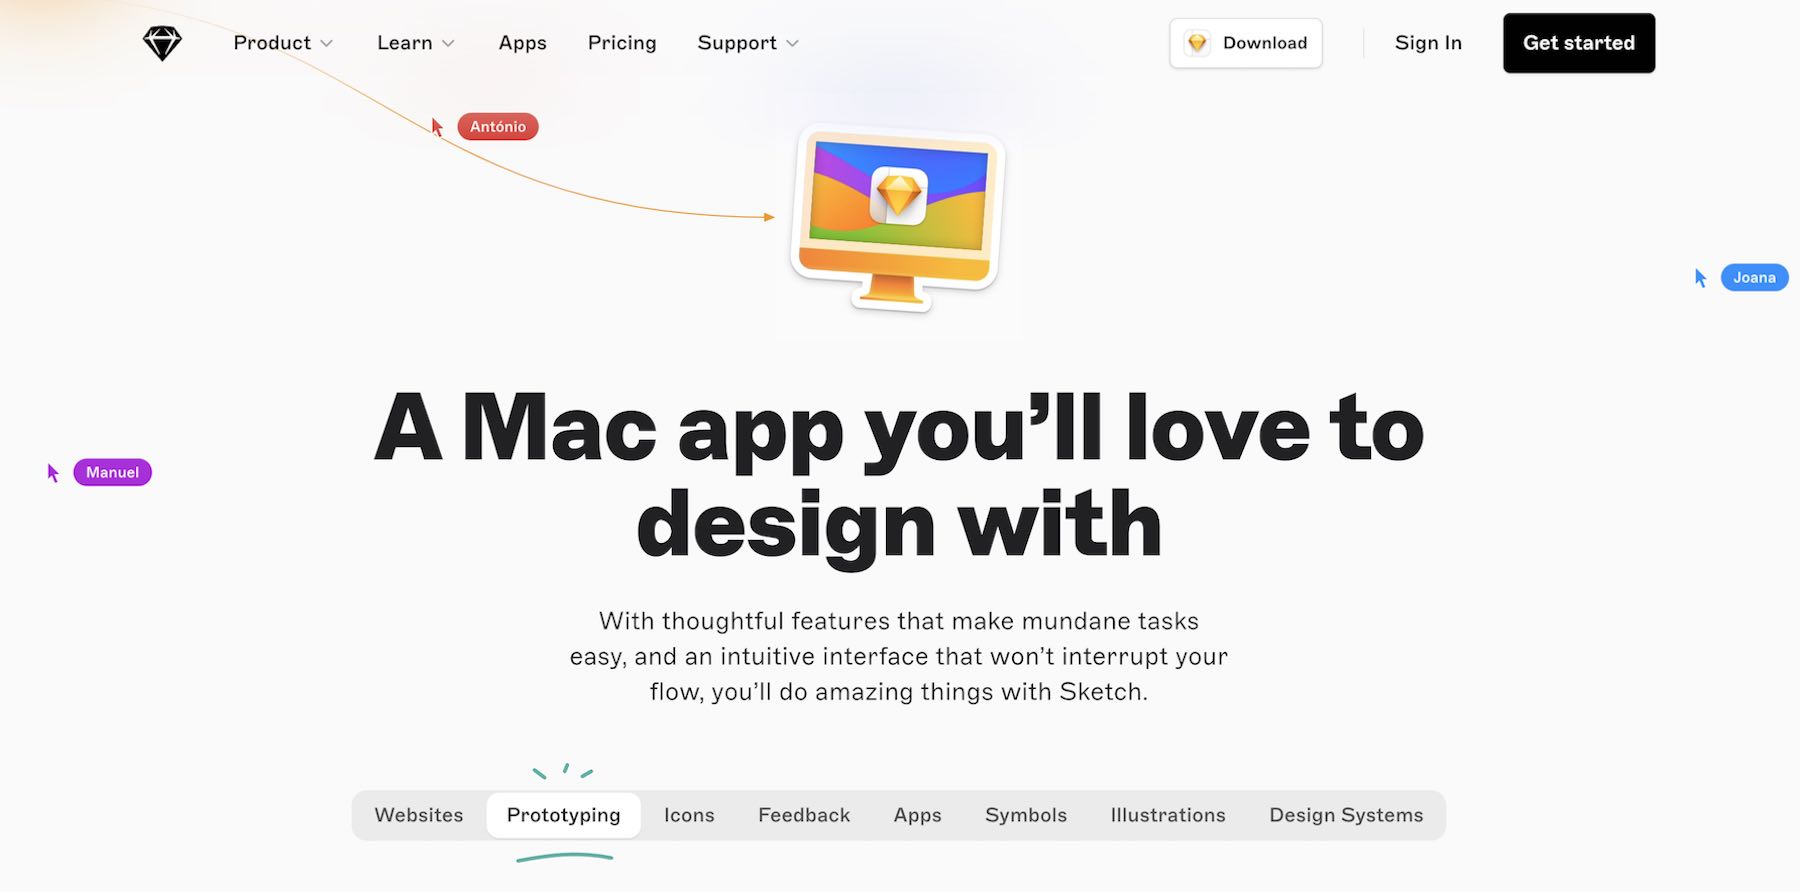 Sketch app for designing websites, apps and vector graphics